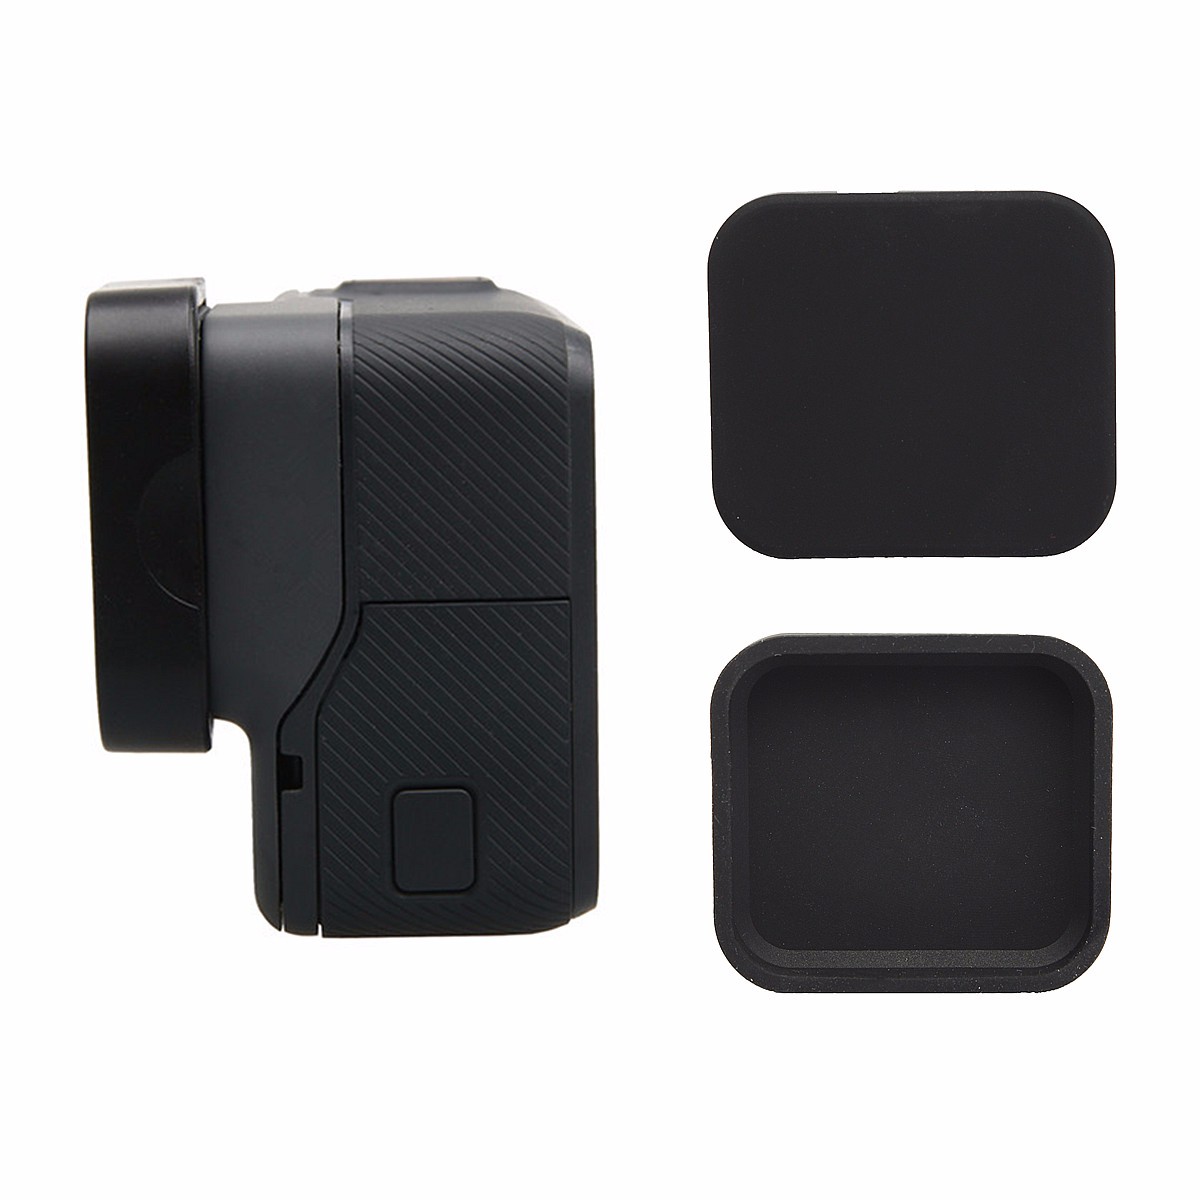 Black-Silicone-Protective-Lens-Cap-Case-Cover-Protector-For-Gopro-Hero-5-Camera-1112880